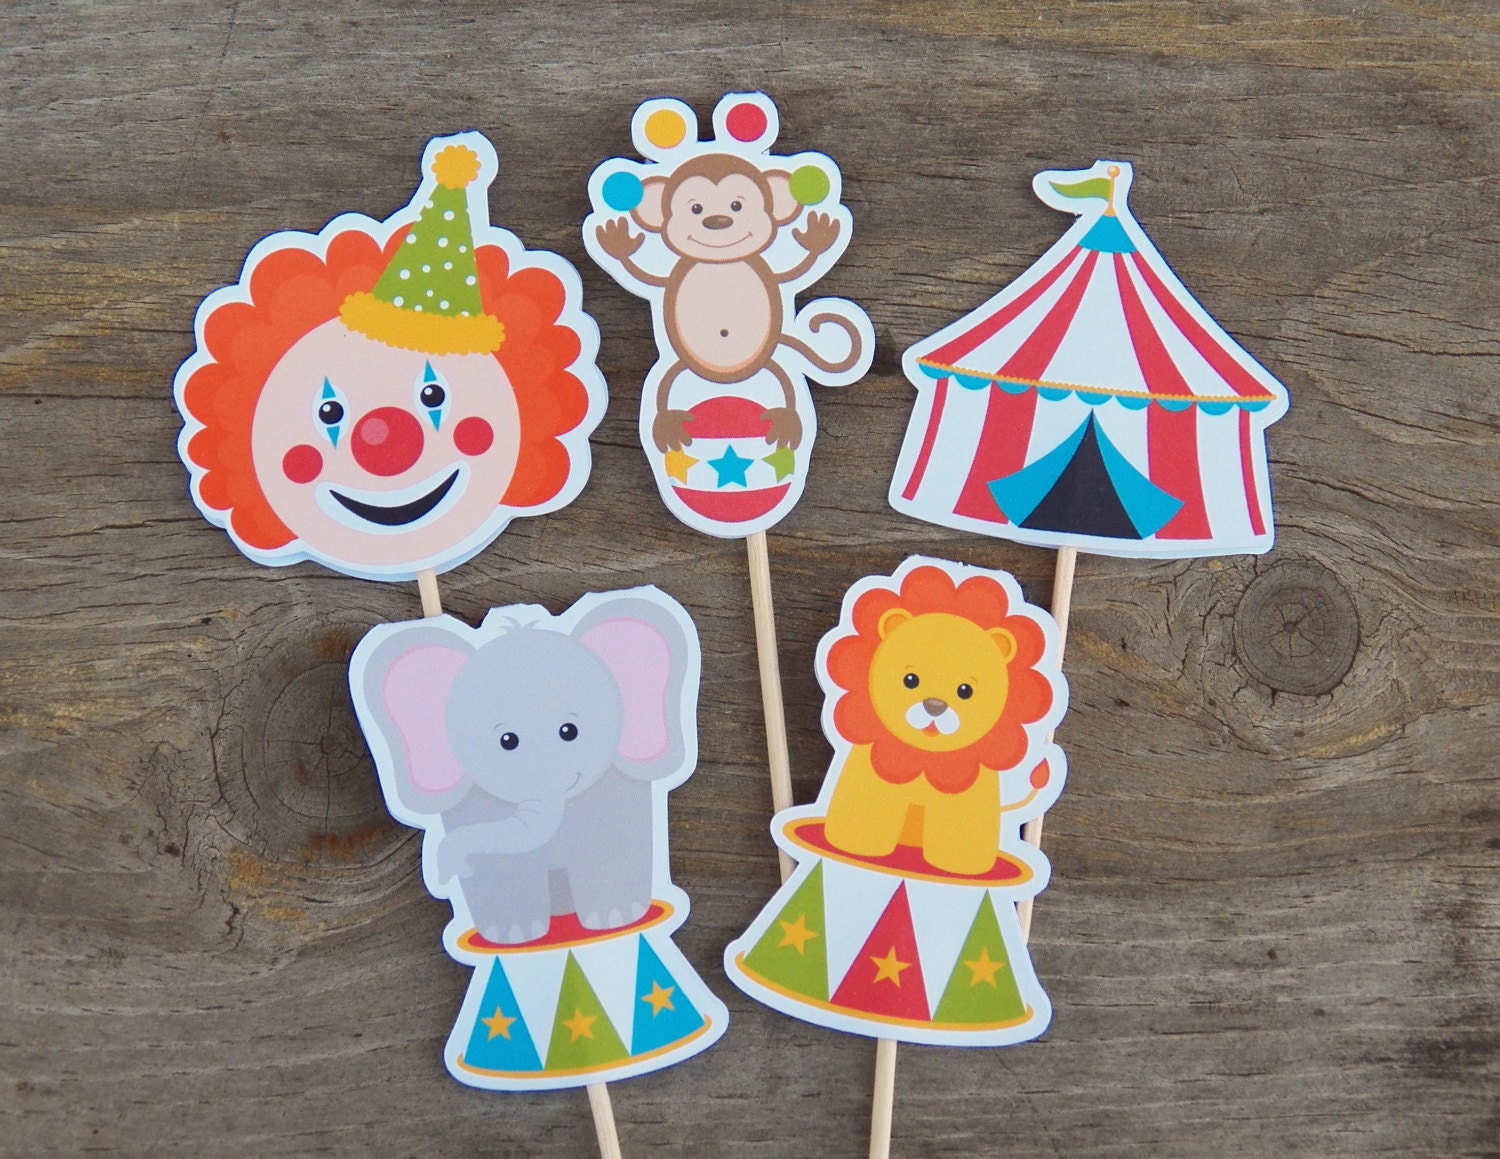 Circus Party - Set of 30 Assorted Circus Cupcake Toppers by The Birthday House